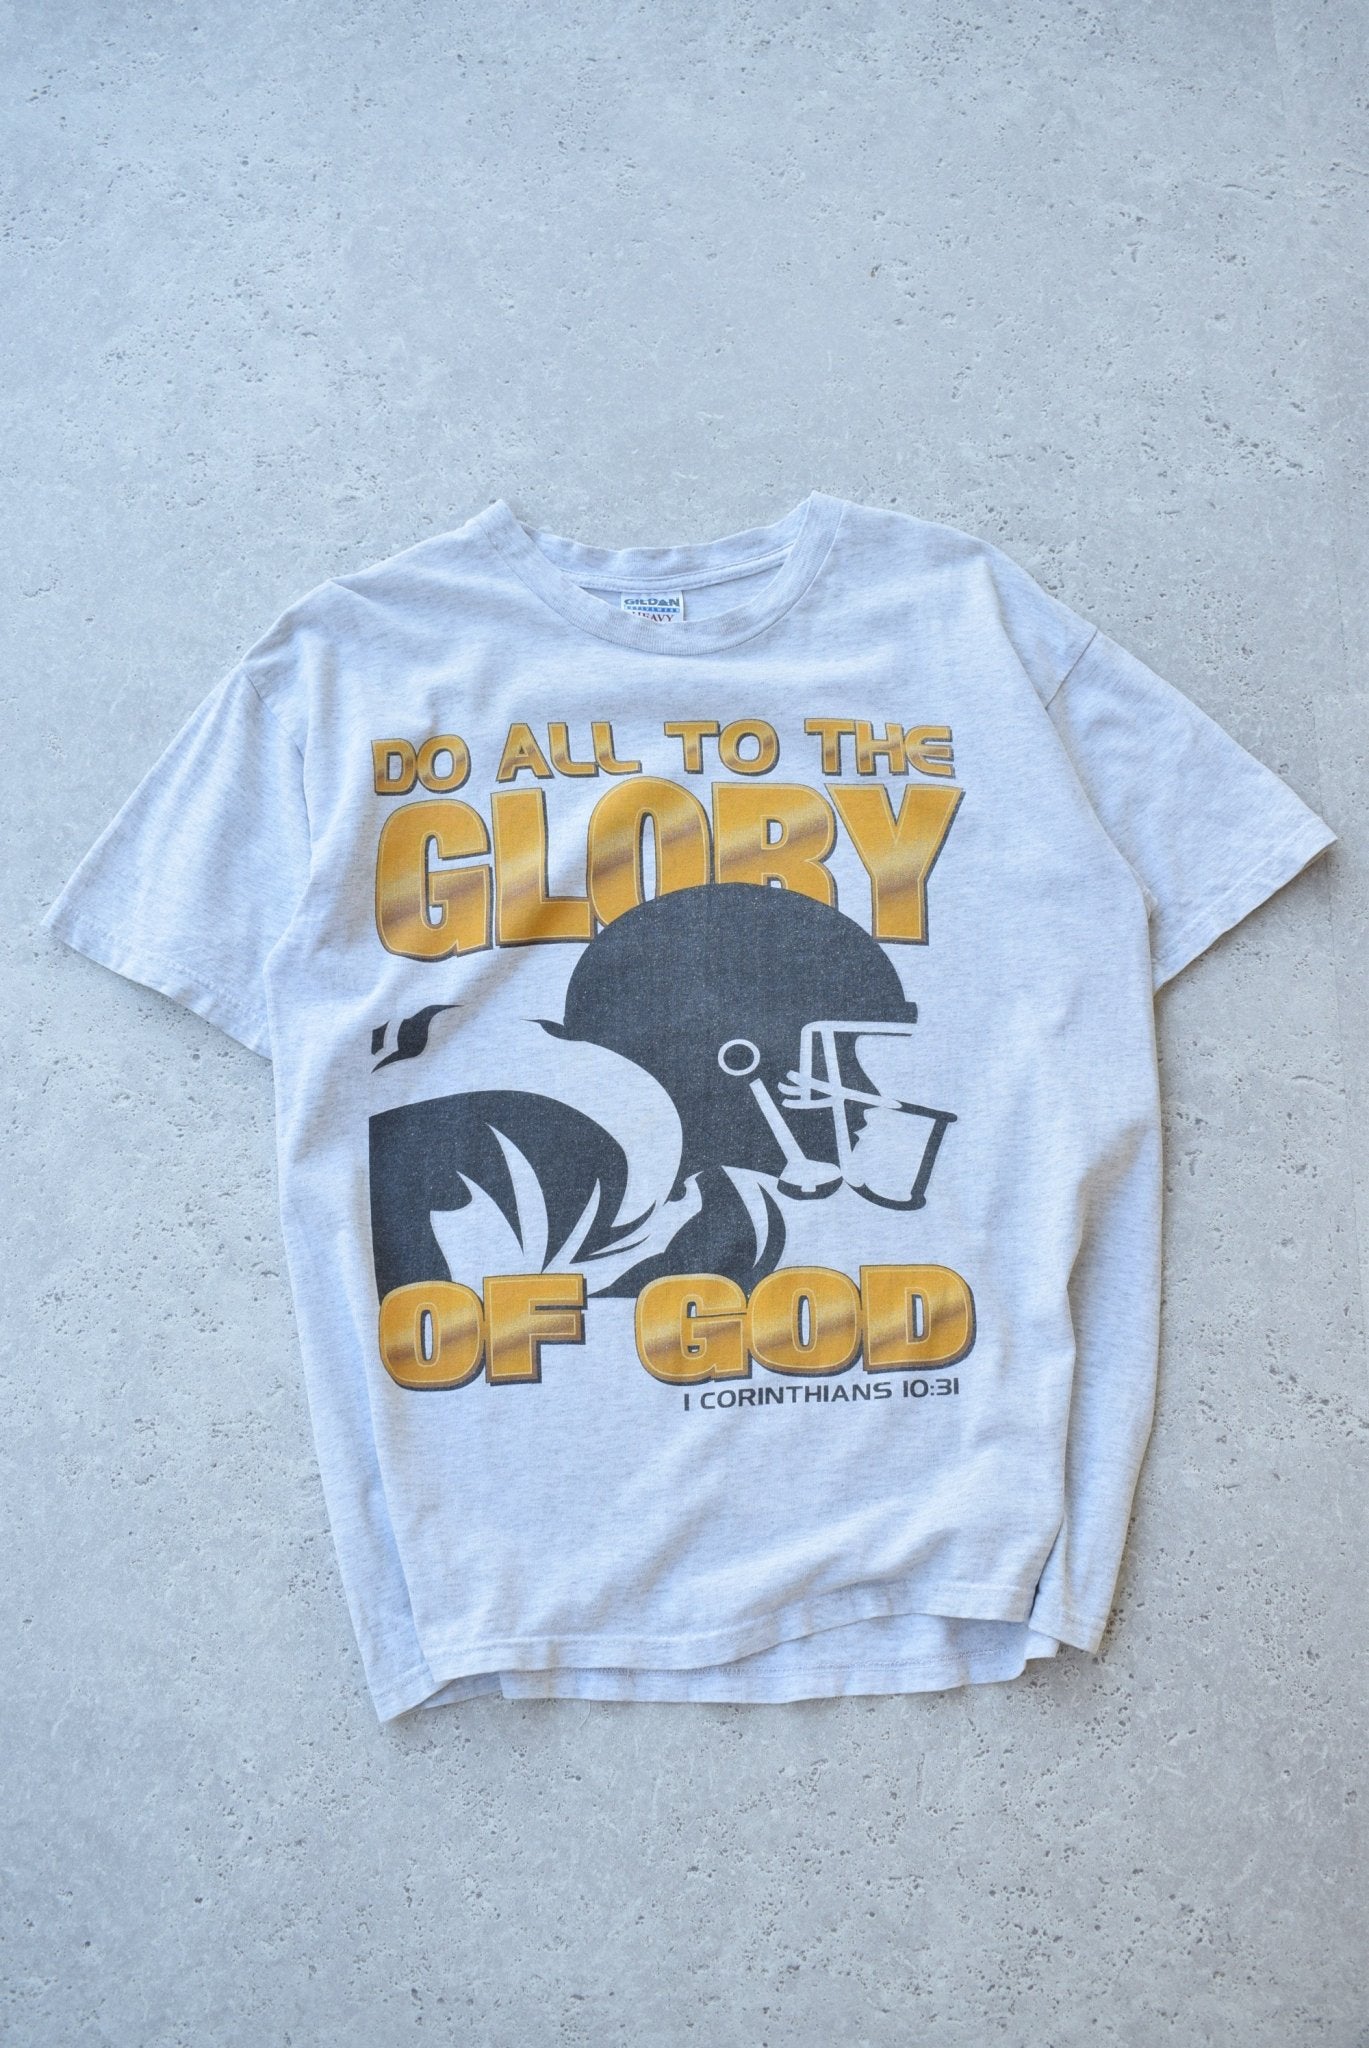 Vintage 90s 'Do All To The Glory Of God' Tee (L) - Retrospective Store